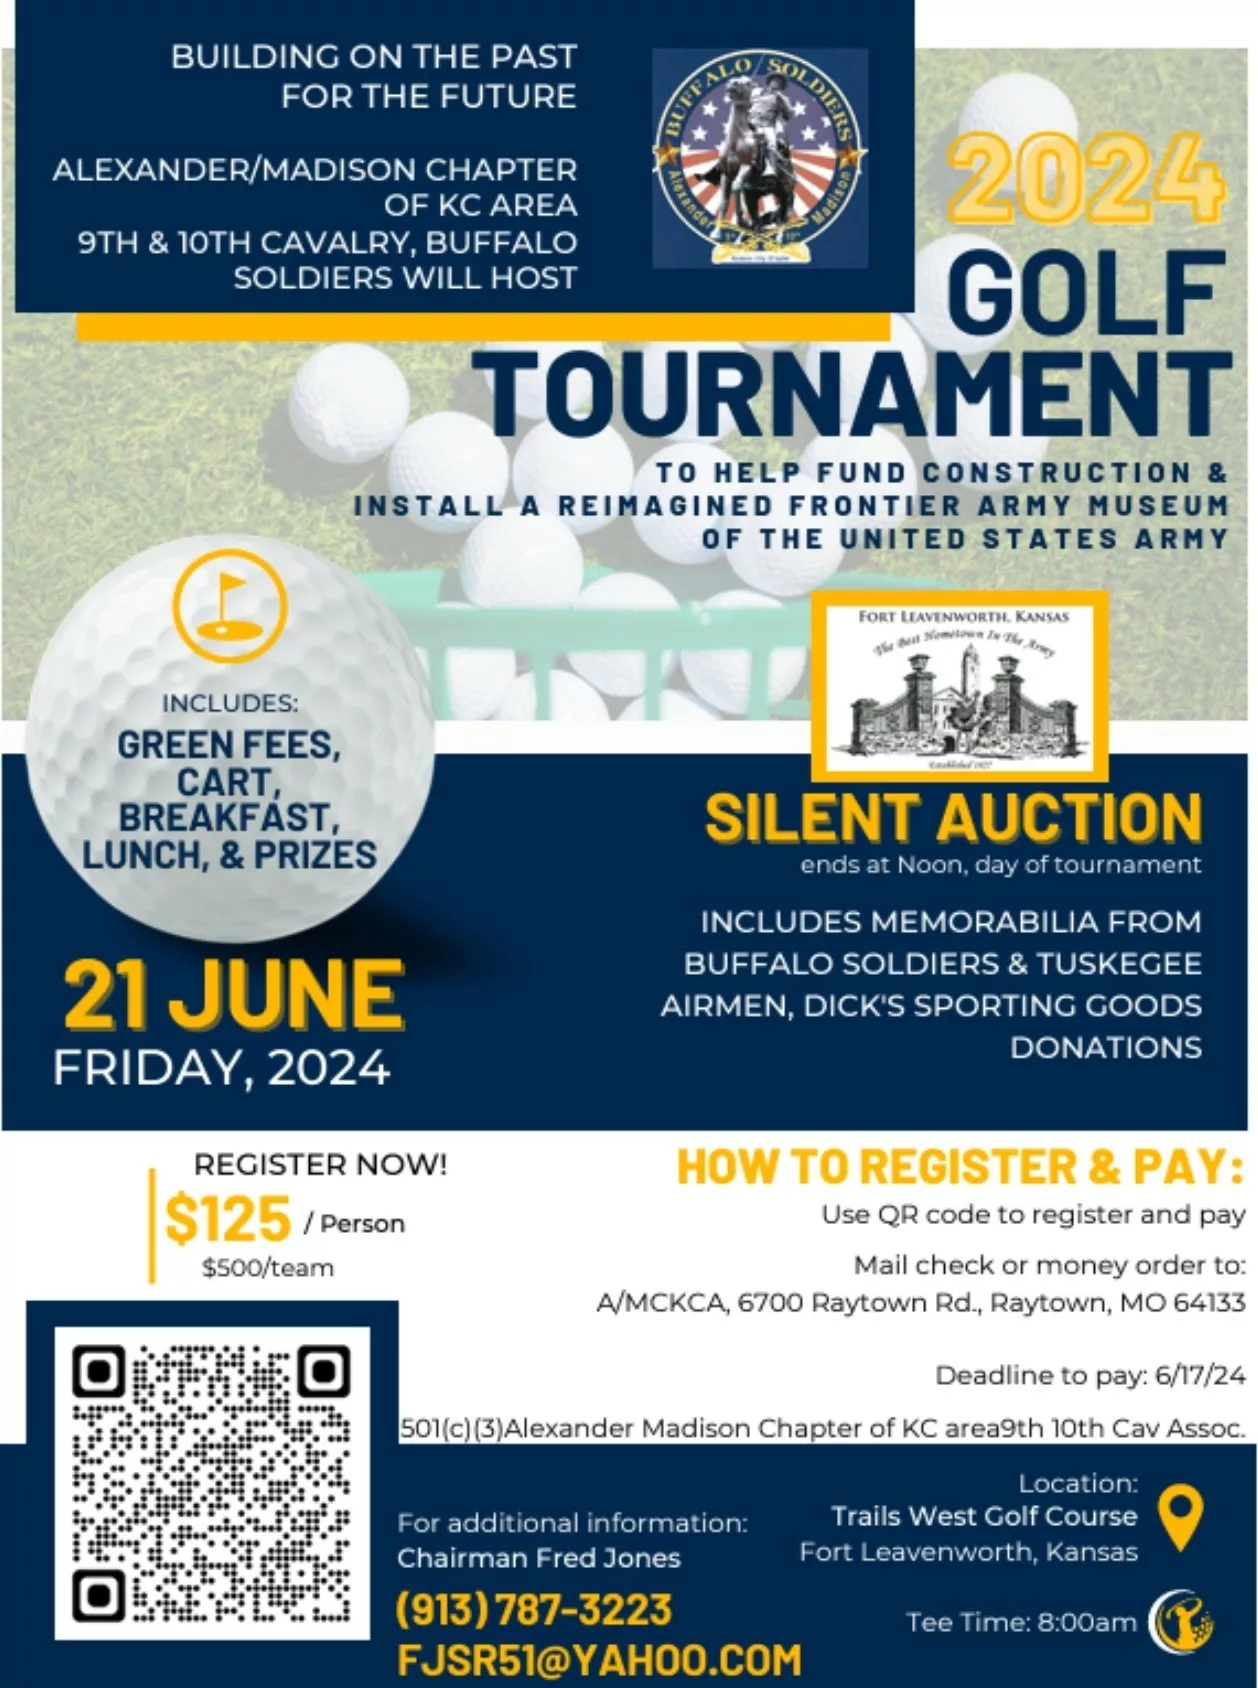 Flyer for Alexander_Madison Chapter, 9th & 10th (Horse) Cavalry, Greater Kansas City Area Buffalo Soldiers, 2024 Golf Tournament & Silent Auction